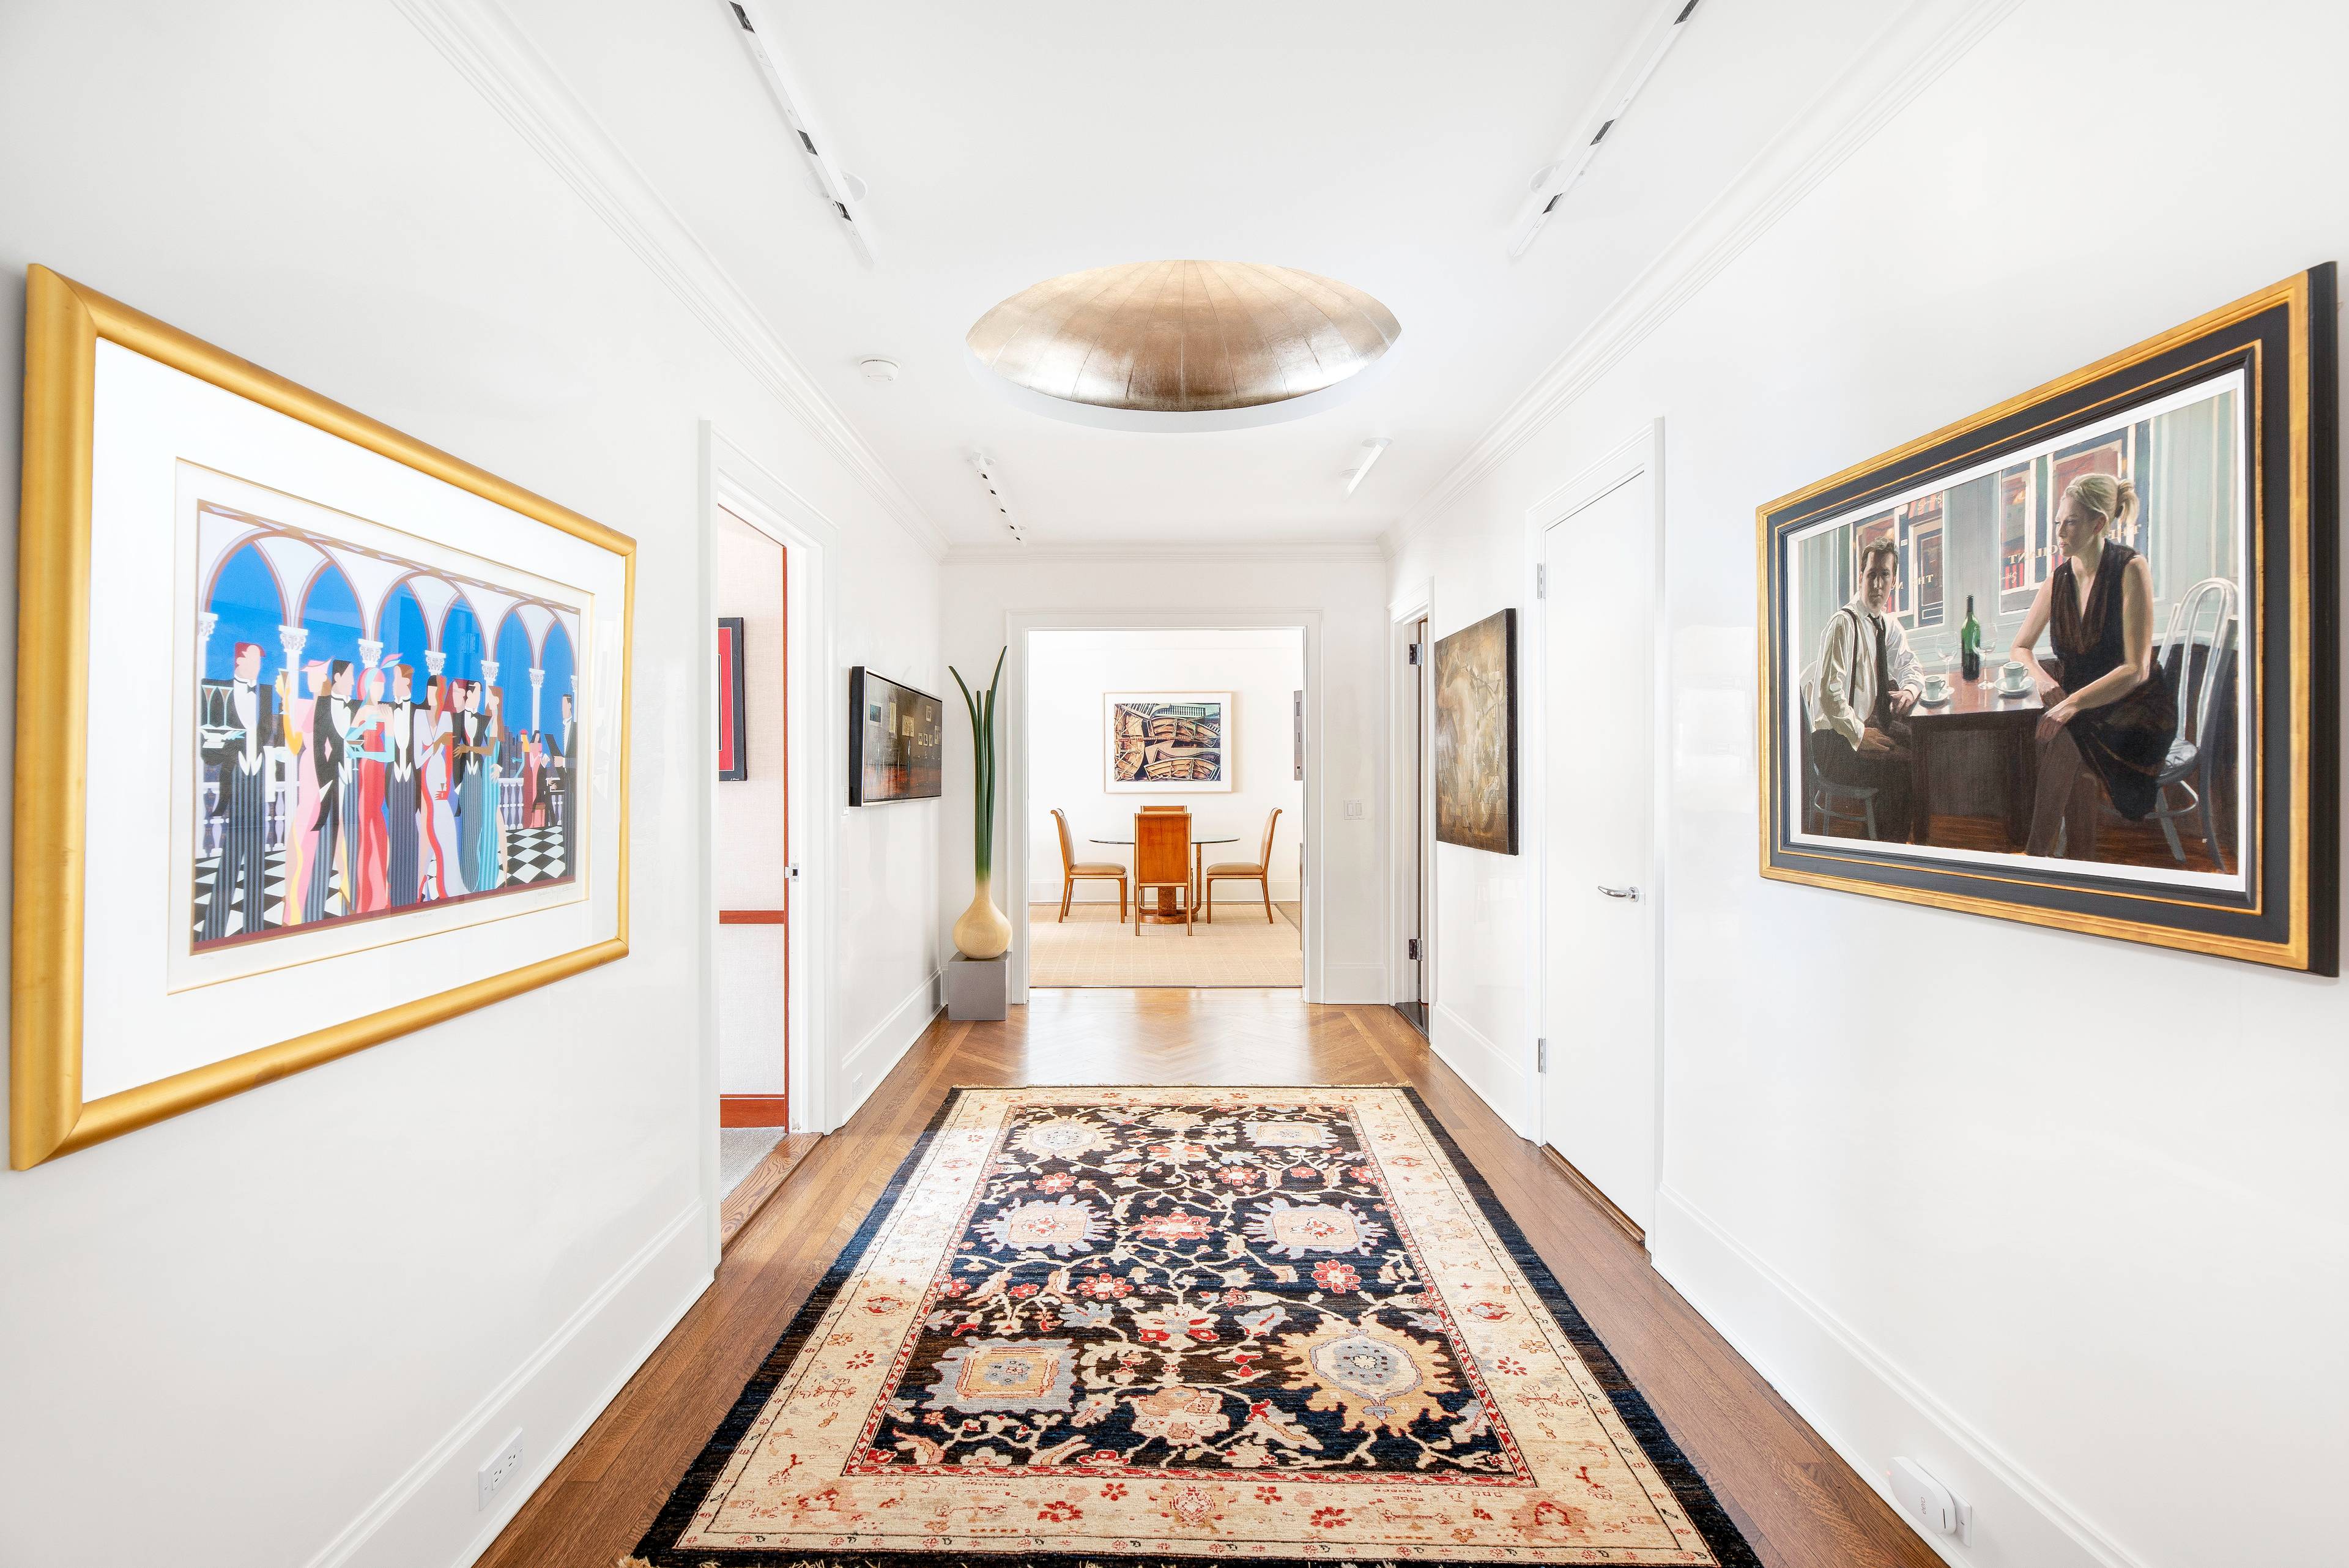 Located in a storied Upper East Side Park Avenue pre war, coop building, and beyond a semi private elevator landing, is an elegant classic six home.